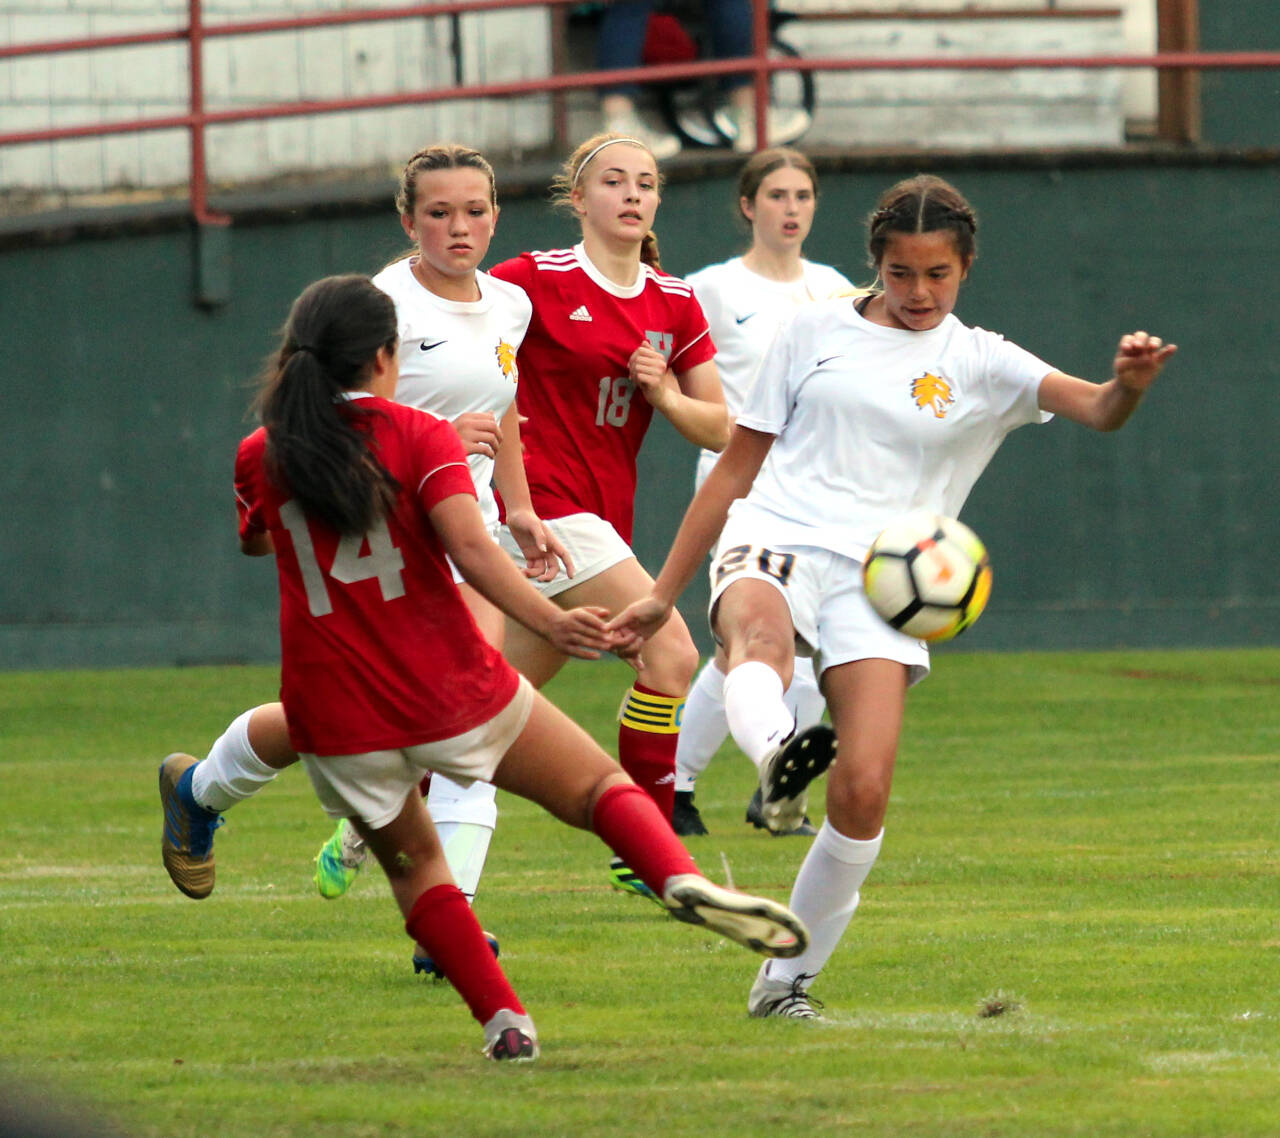 PHOTO BY BEN WINKELMAN Aberdeen’s Jaylynn Phimmasone, right, competes with Hoquiam’s Yazmin Garcia-Lopez during a game on Tuesday in Hoquiam. Phimmasone scored the only goal of the game on a free kick in the 48th minute.